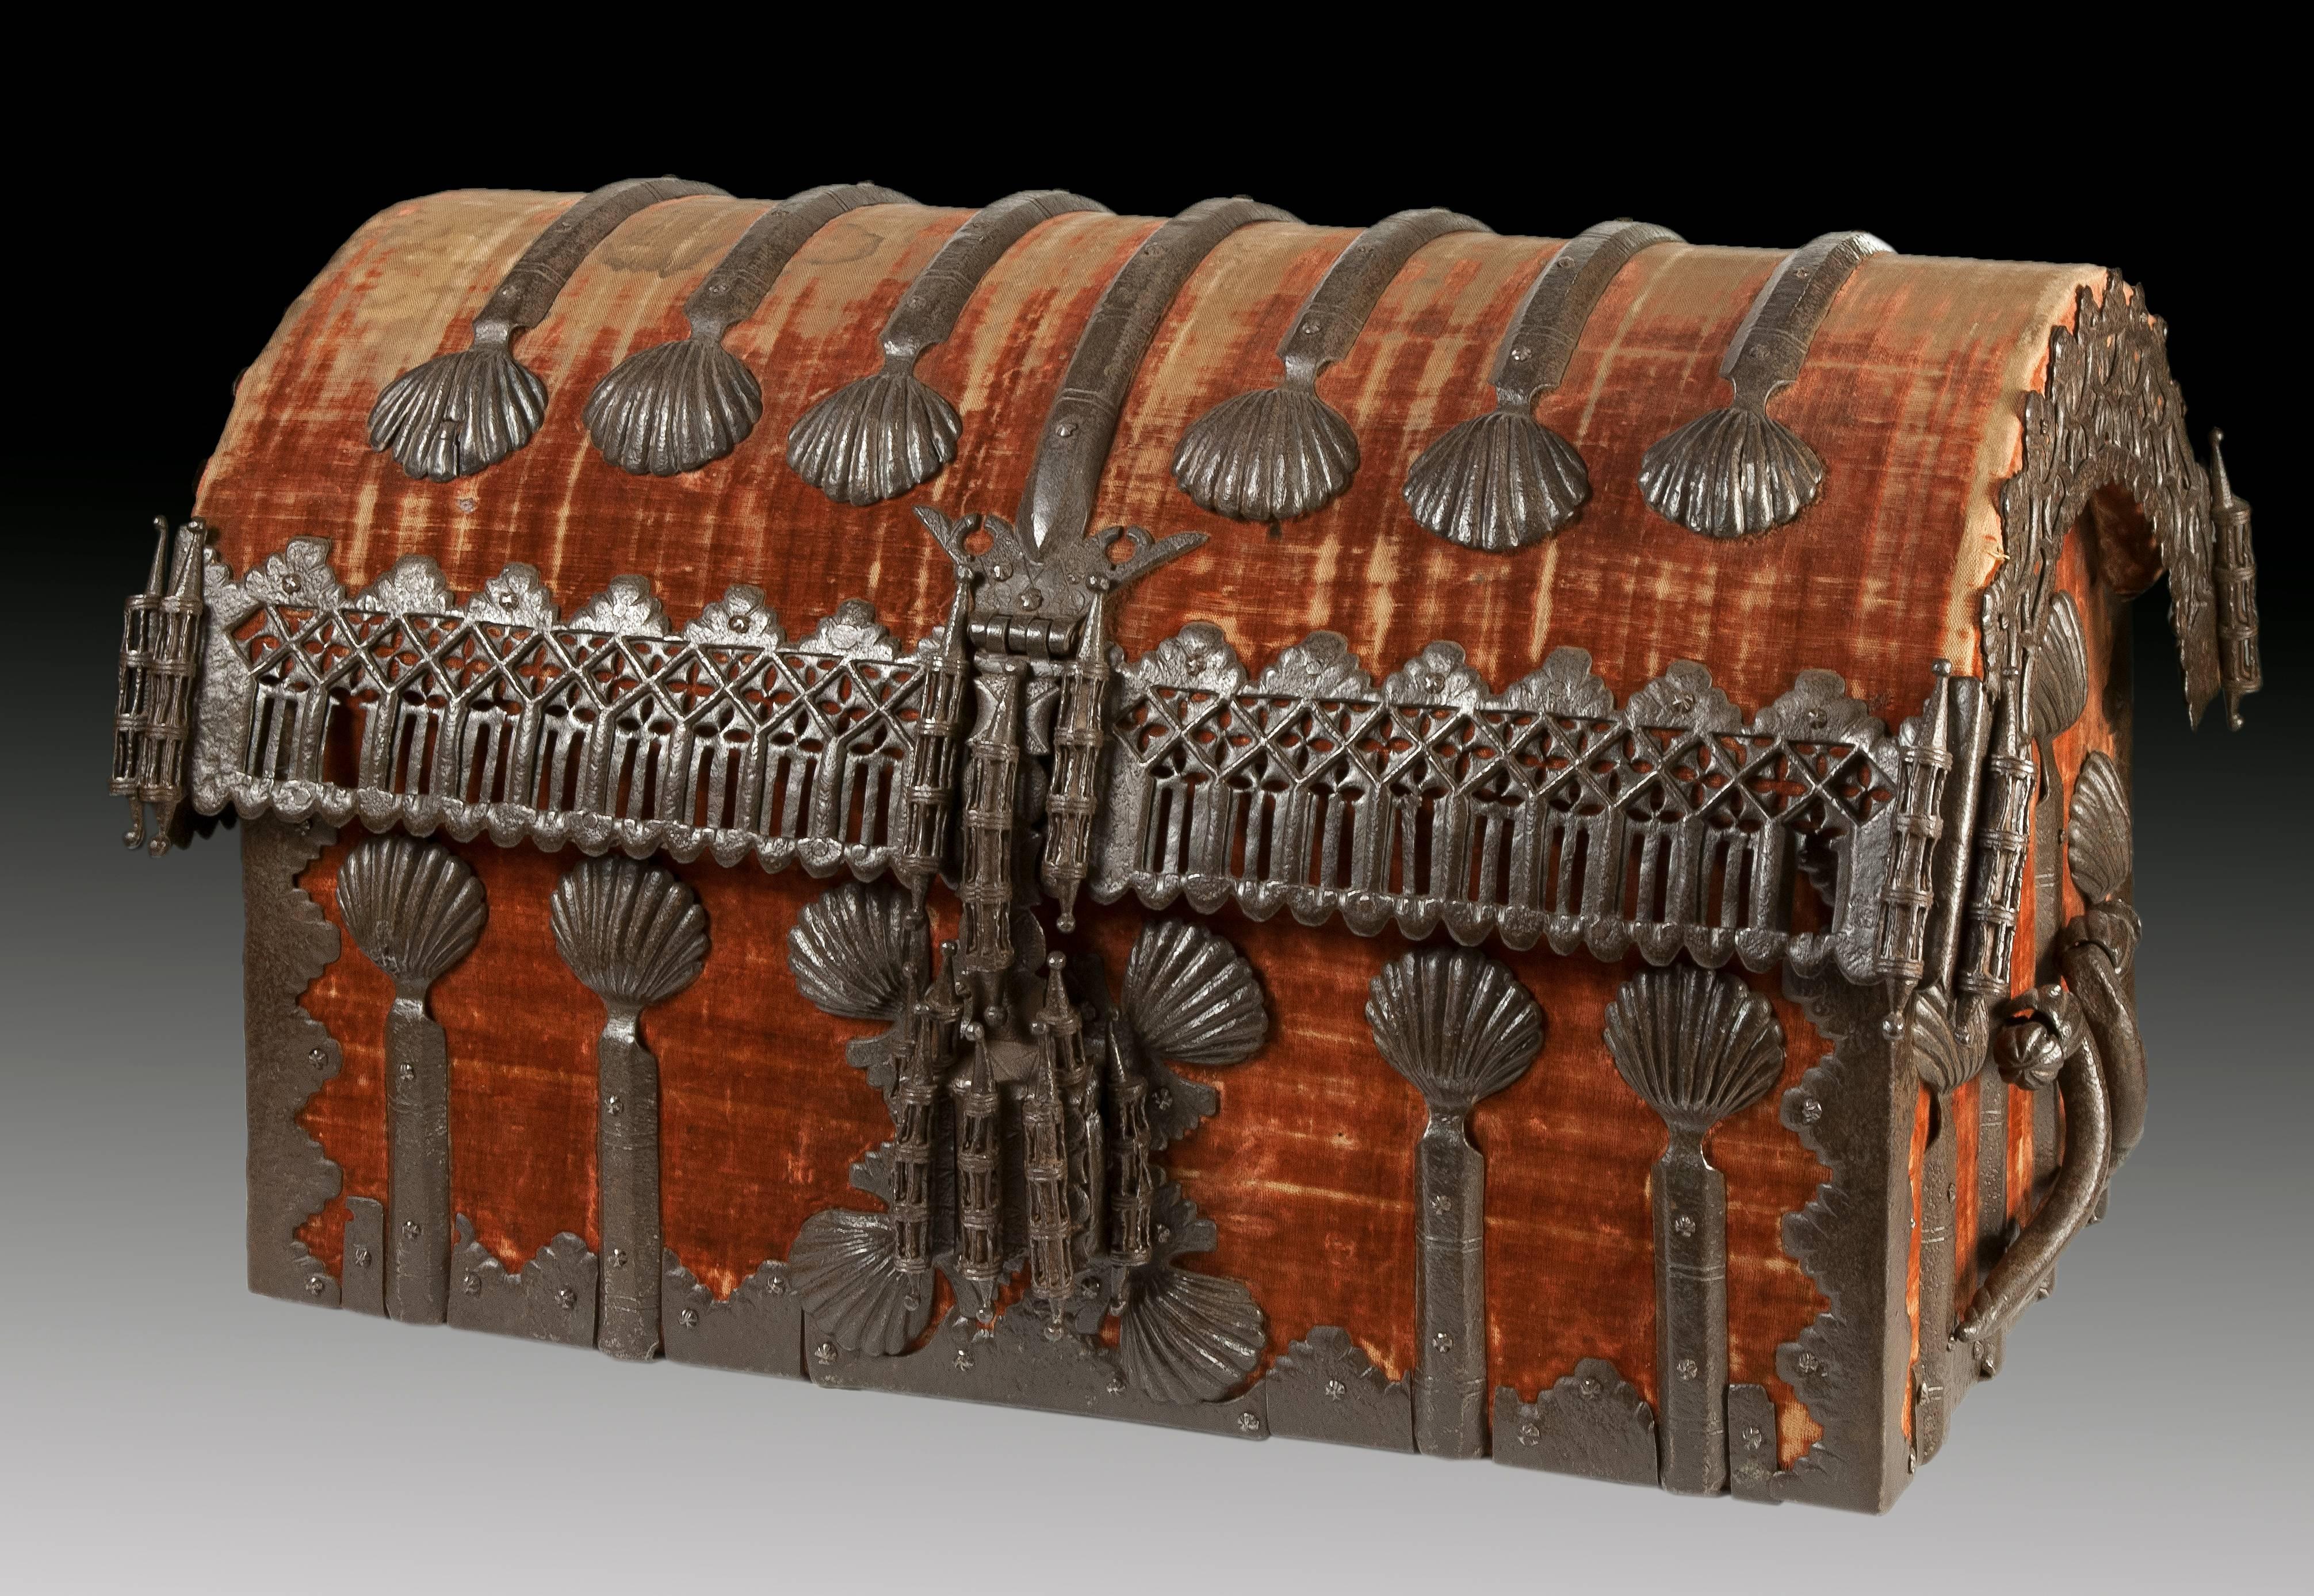 Gothic chest in wood lined with velvet and wrought iron in the typical typology of the XV century. The good work in the iron forge is indisputable, it presents the proliferation in semicircular fold flap of veneras as in the different facets of the